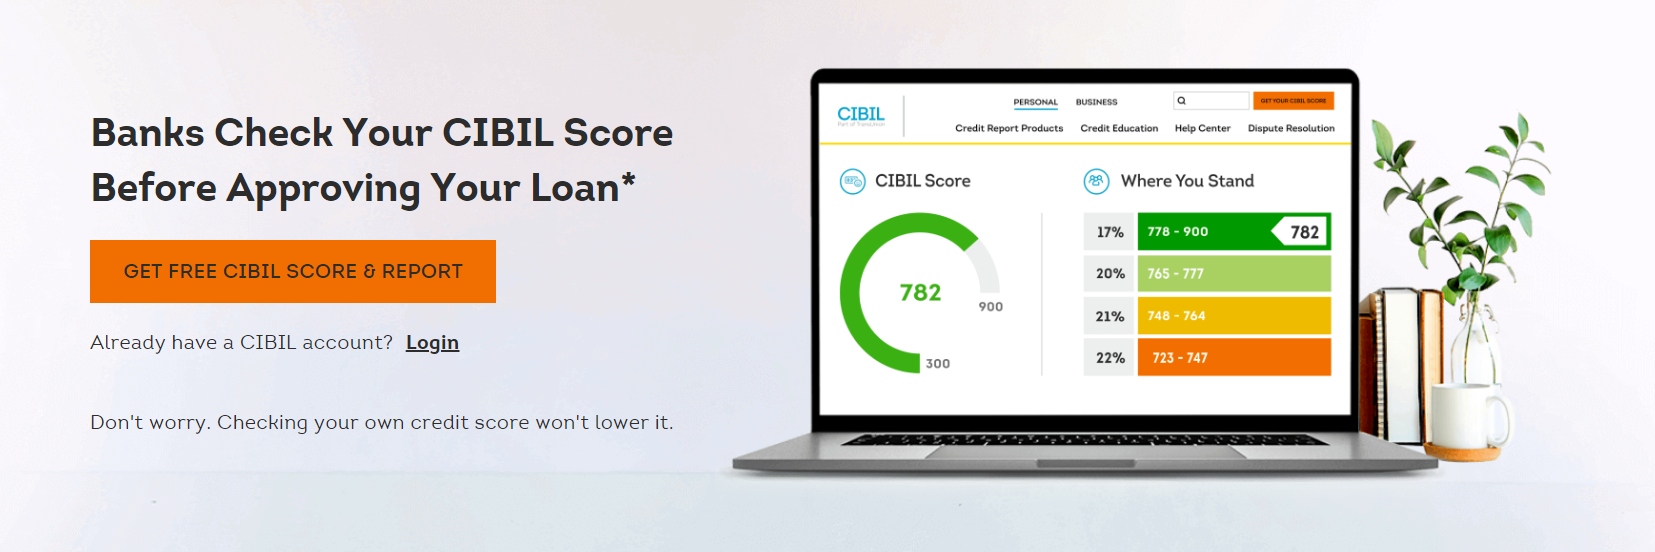 What is CIBIL? 